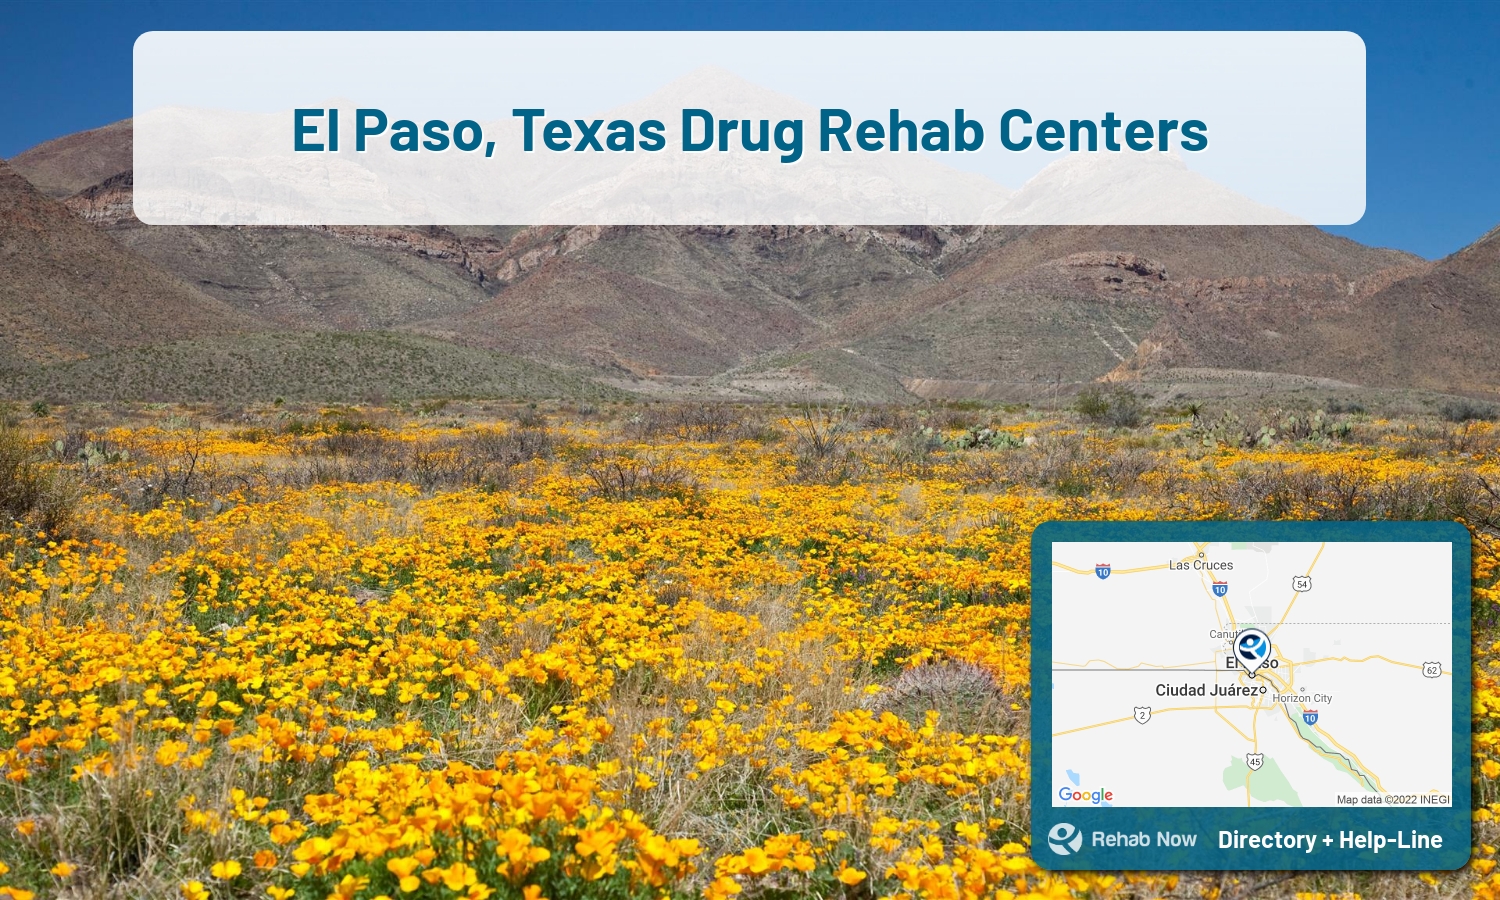 El Paso, TX Treatment Centers. Find drug rehab in El Paso, Texas, or detox and treatment programs. Get the right help now!